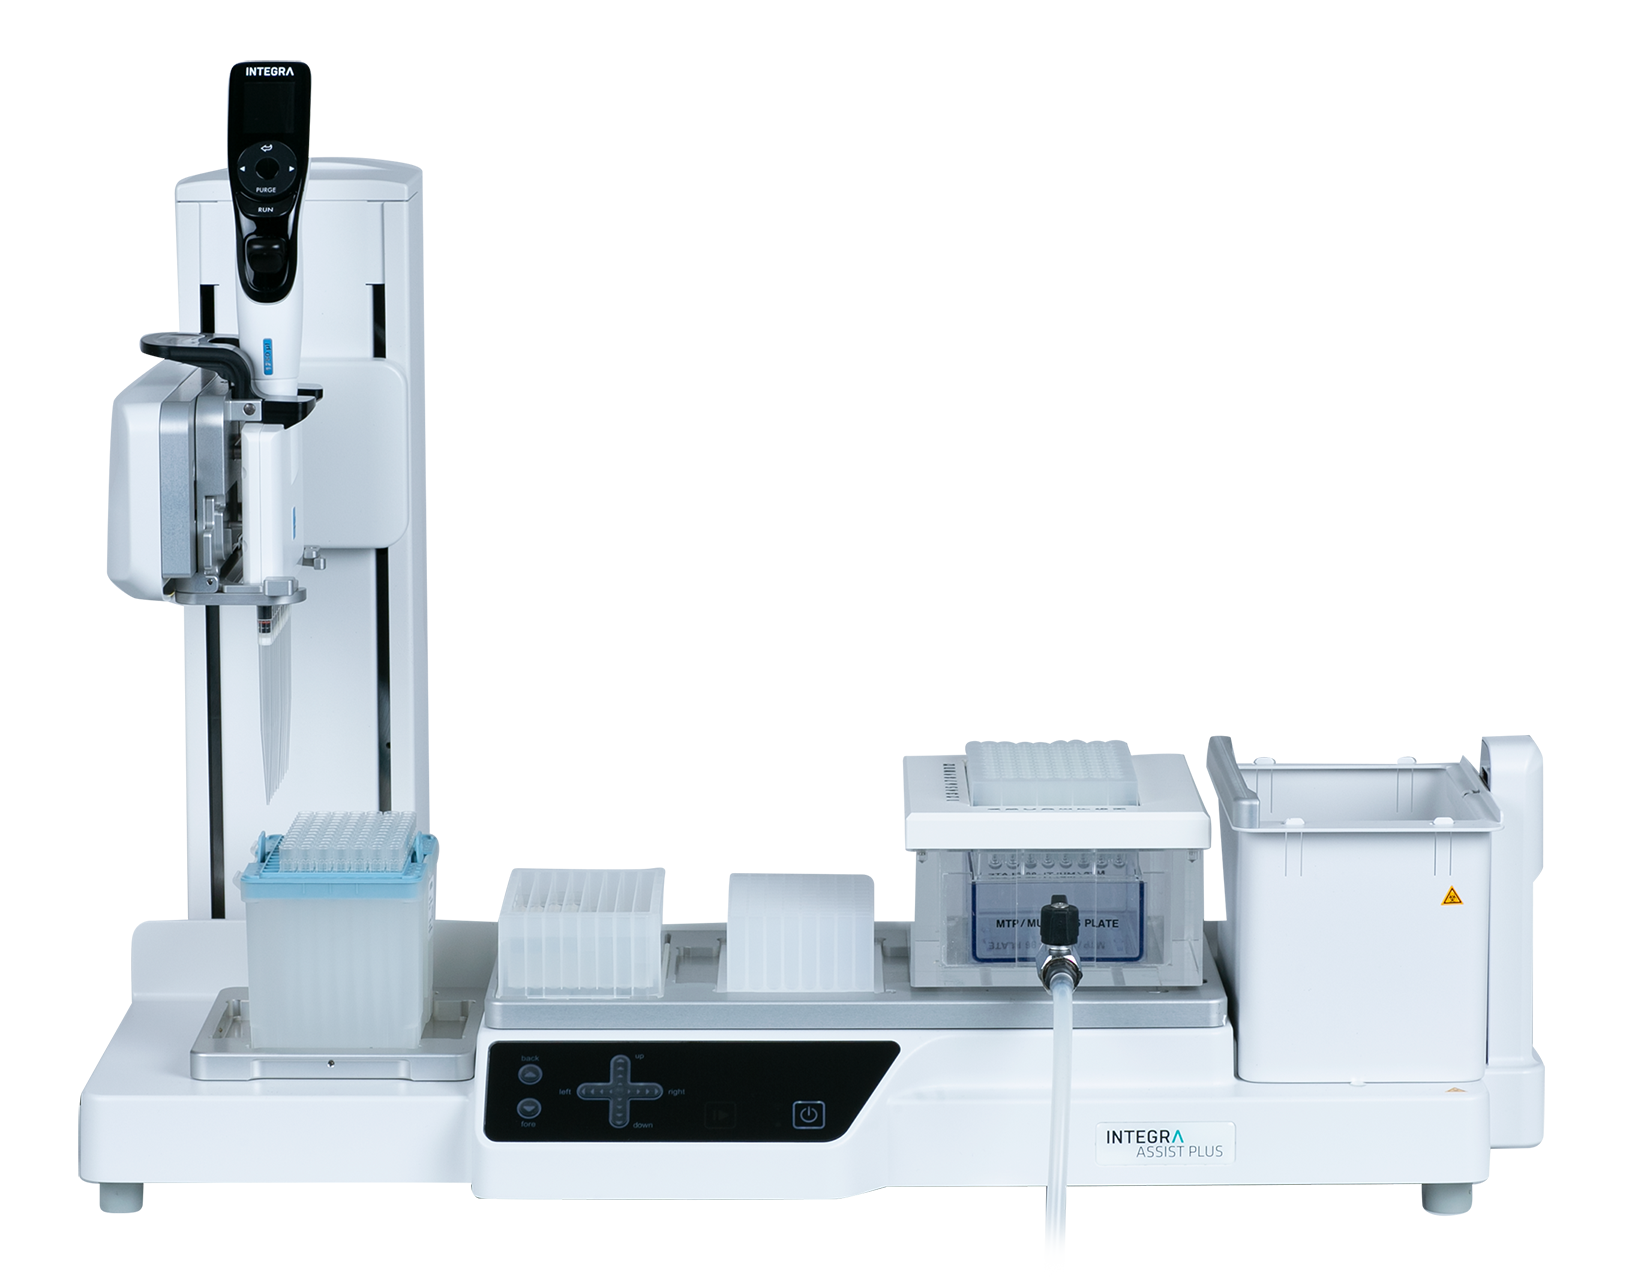 ASSIST PLUS pipetting robot with an 8 row reagent reservoir, a culture plate and MACHEREY-NAGEL's NucleoVac 96 Vacuum Manifold.